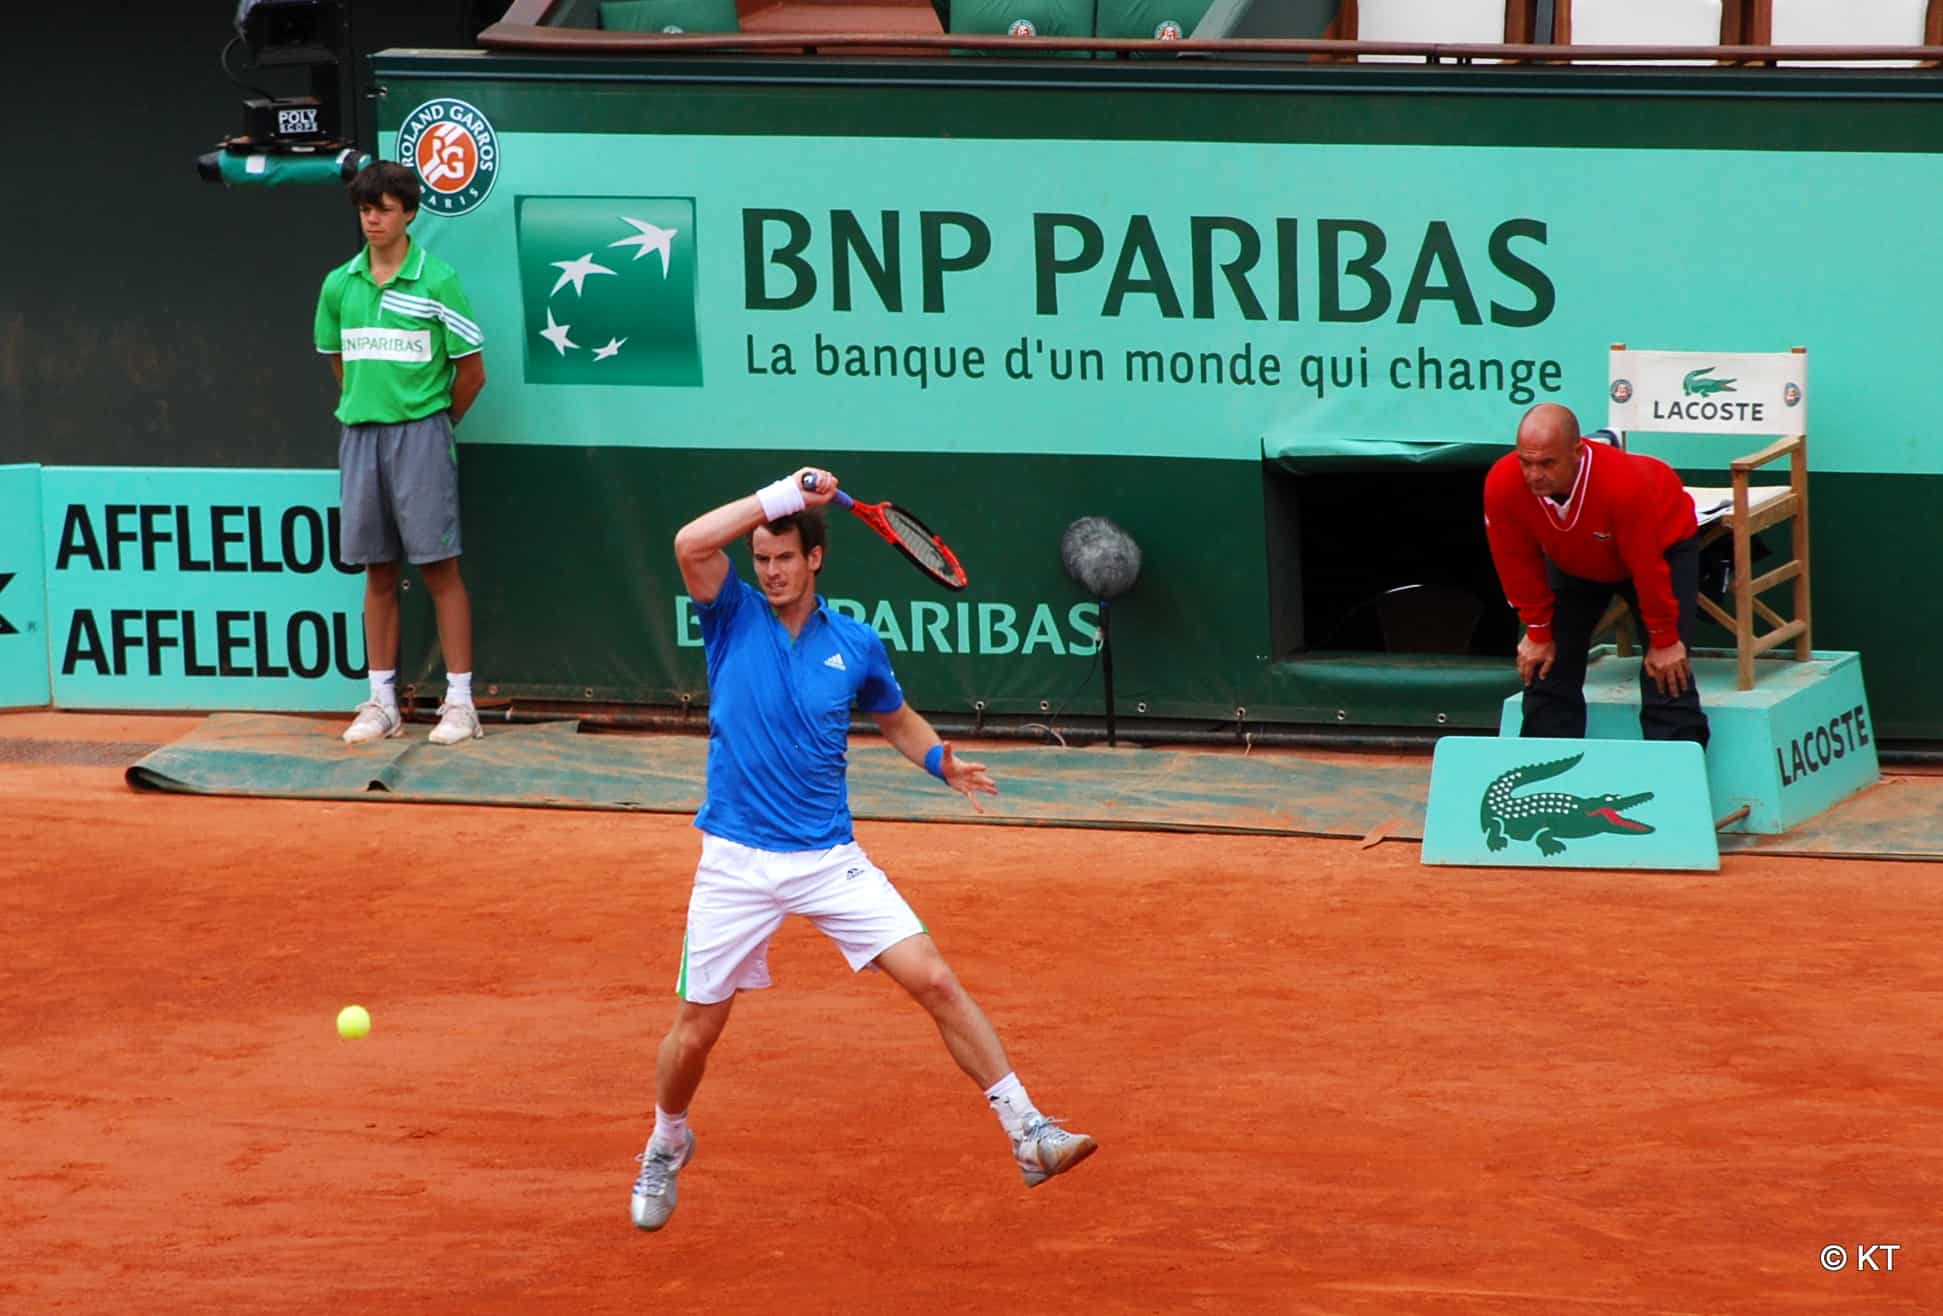 Andy Murray 2011 French Open